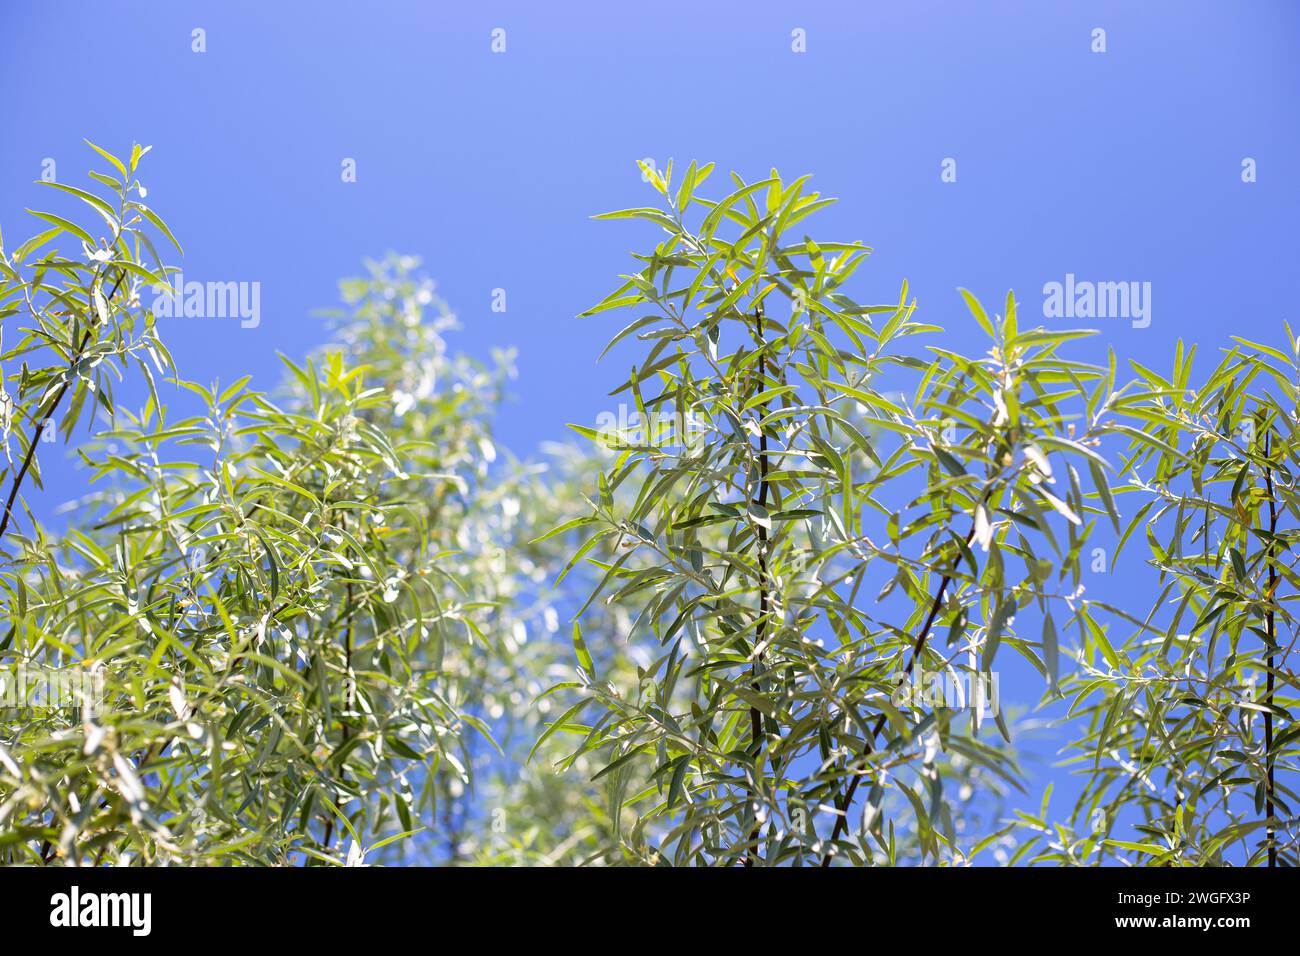 Eleven silver plant with long narrow leaves against a blue sky. Decorative bush. Stock Photo